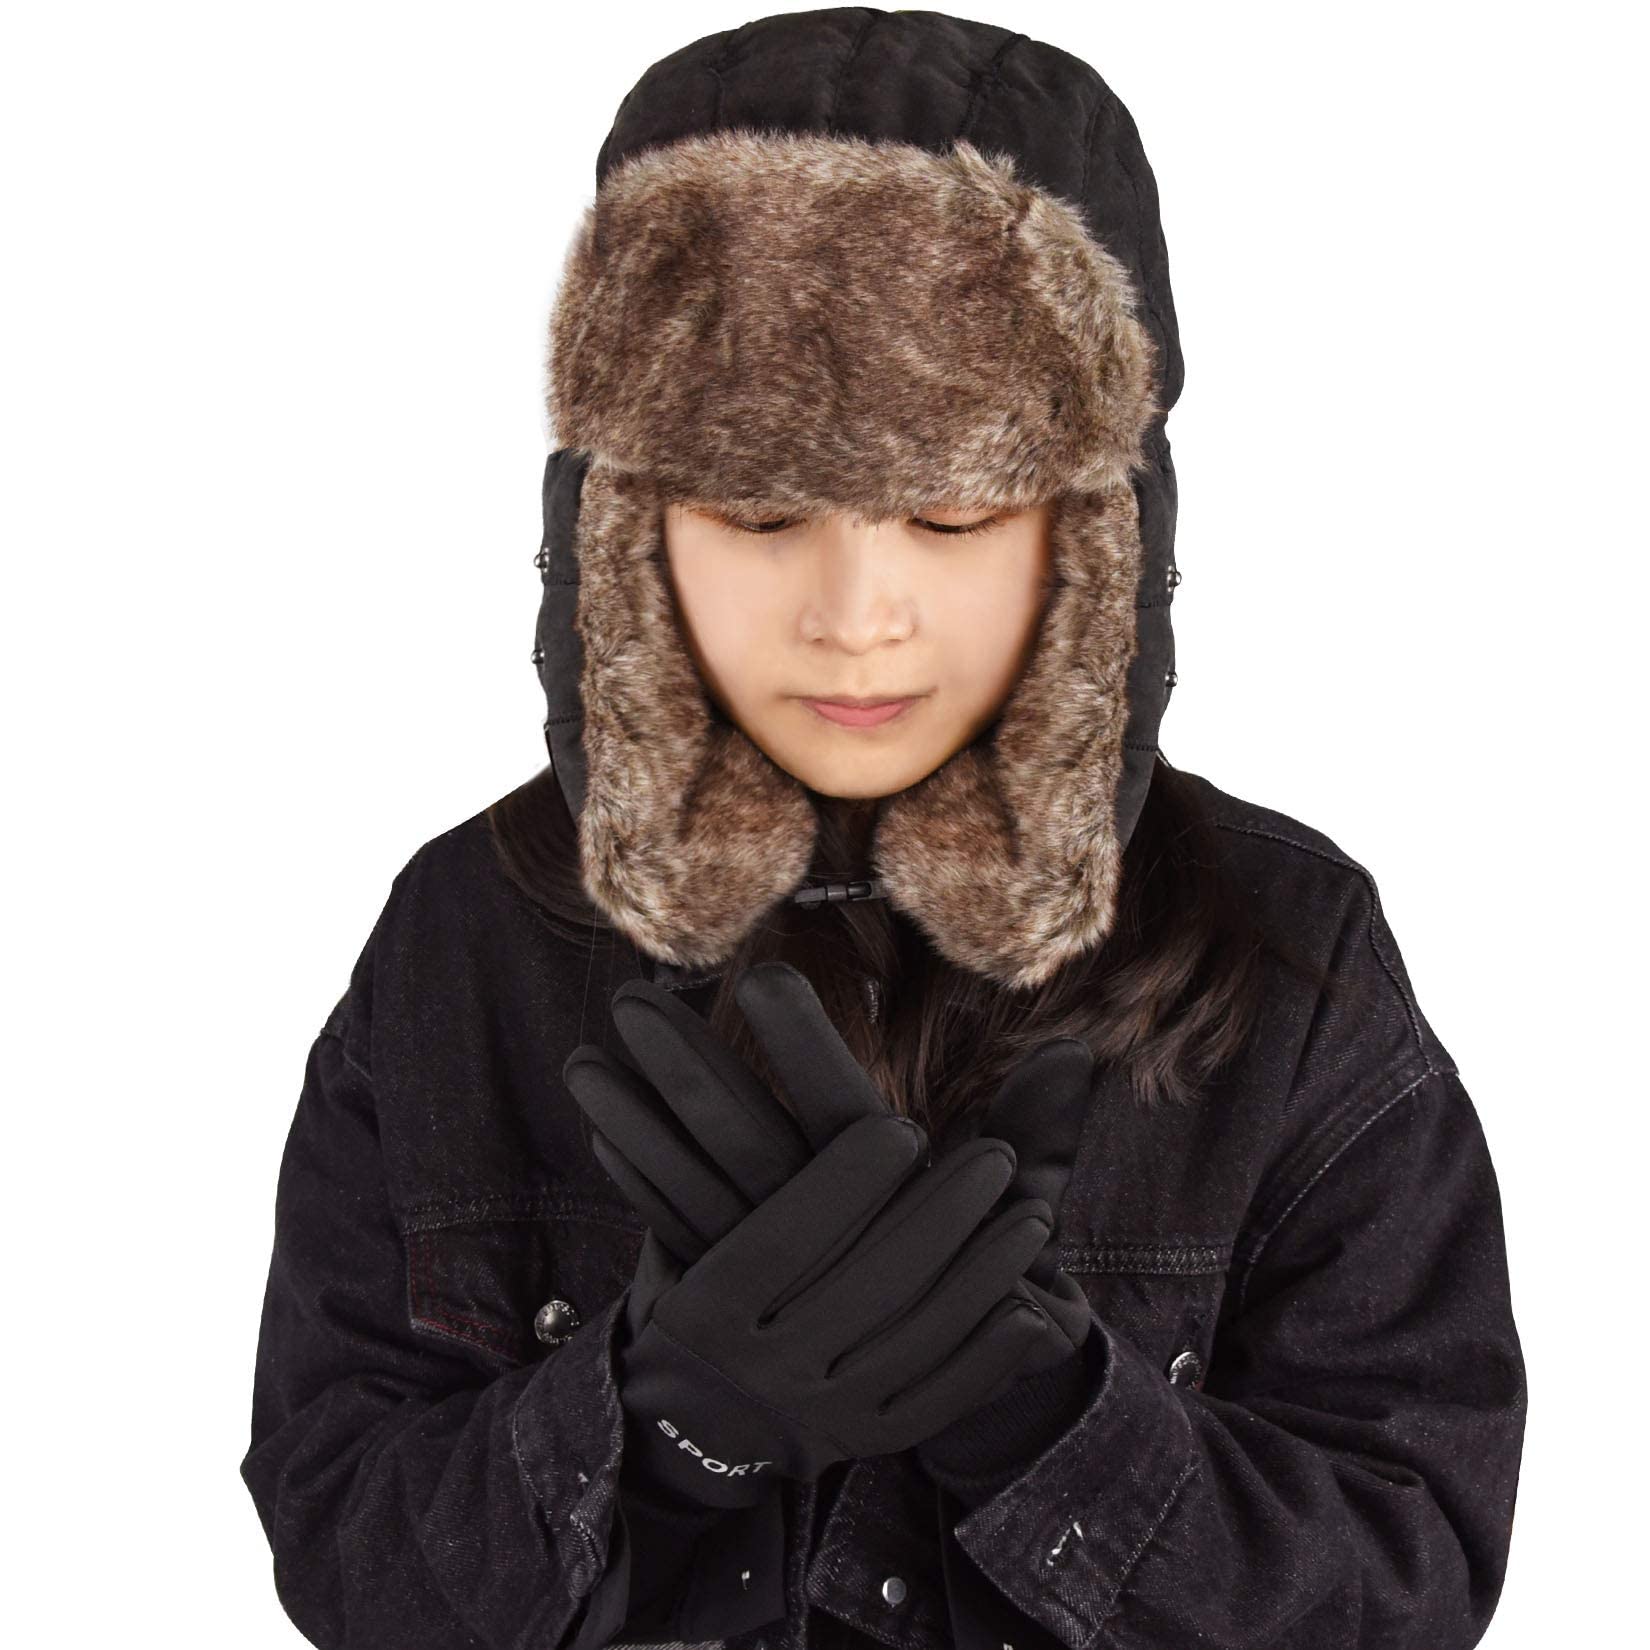 2 Pcs Winter Hat and Golves Set Include Knit Plush Lined Trapper Hat and Windproof and Waterproof Ski Unisex Gloves for women (Black)